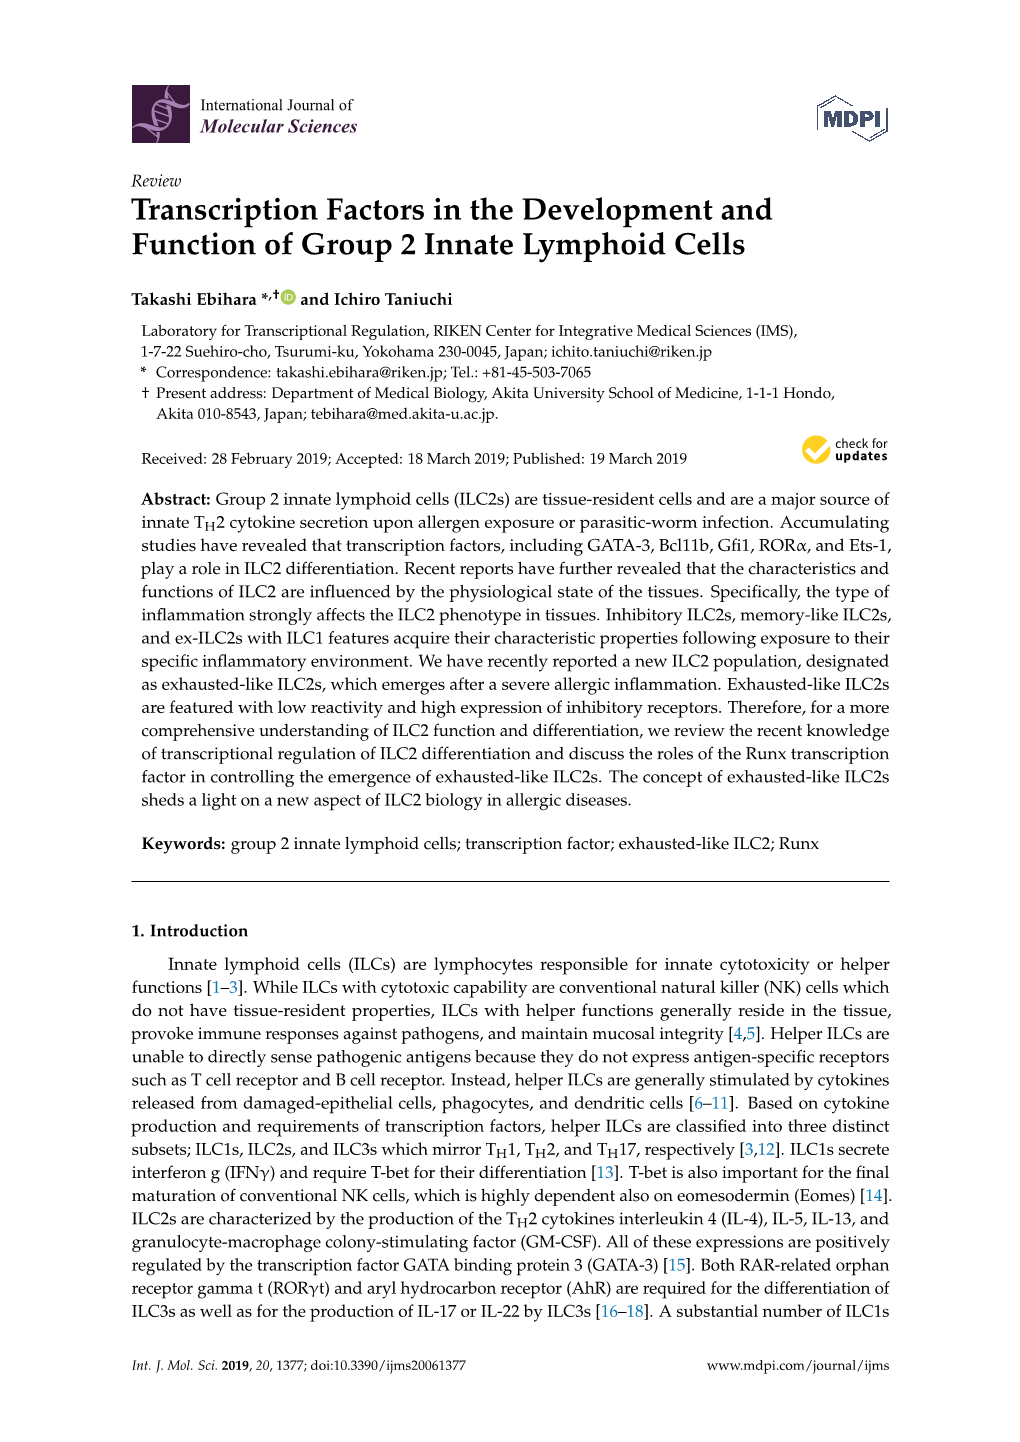 Transcription Factors in the Development and Function of Group 2 Innate Lymphoid Cells